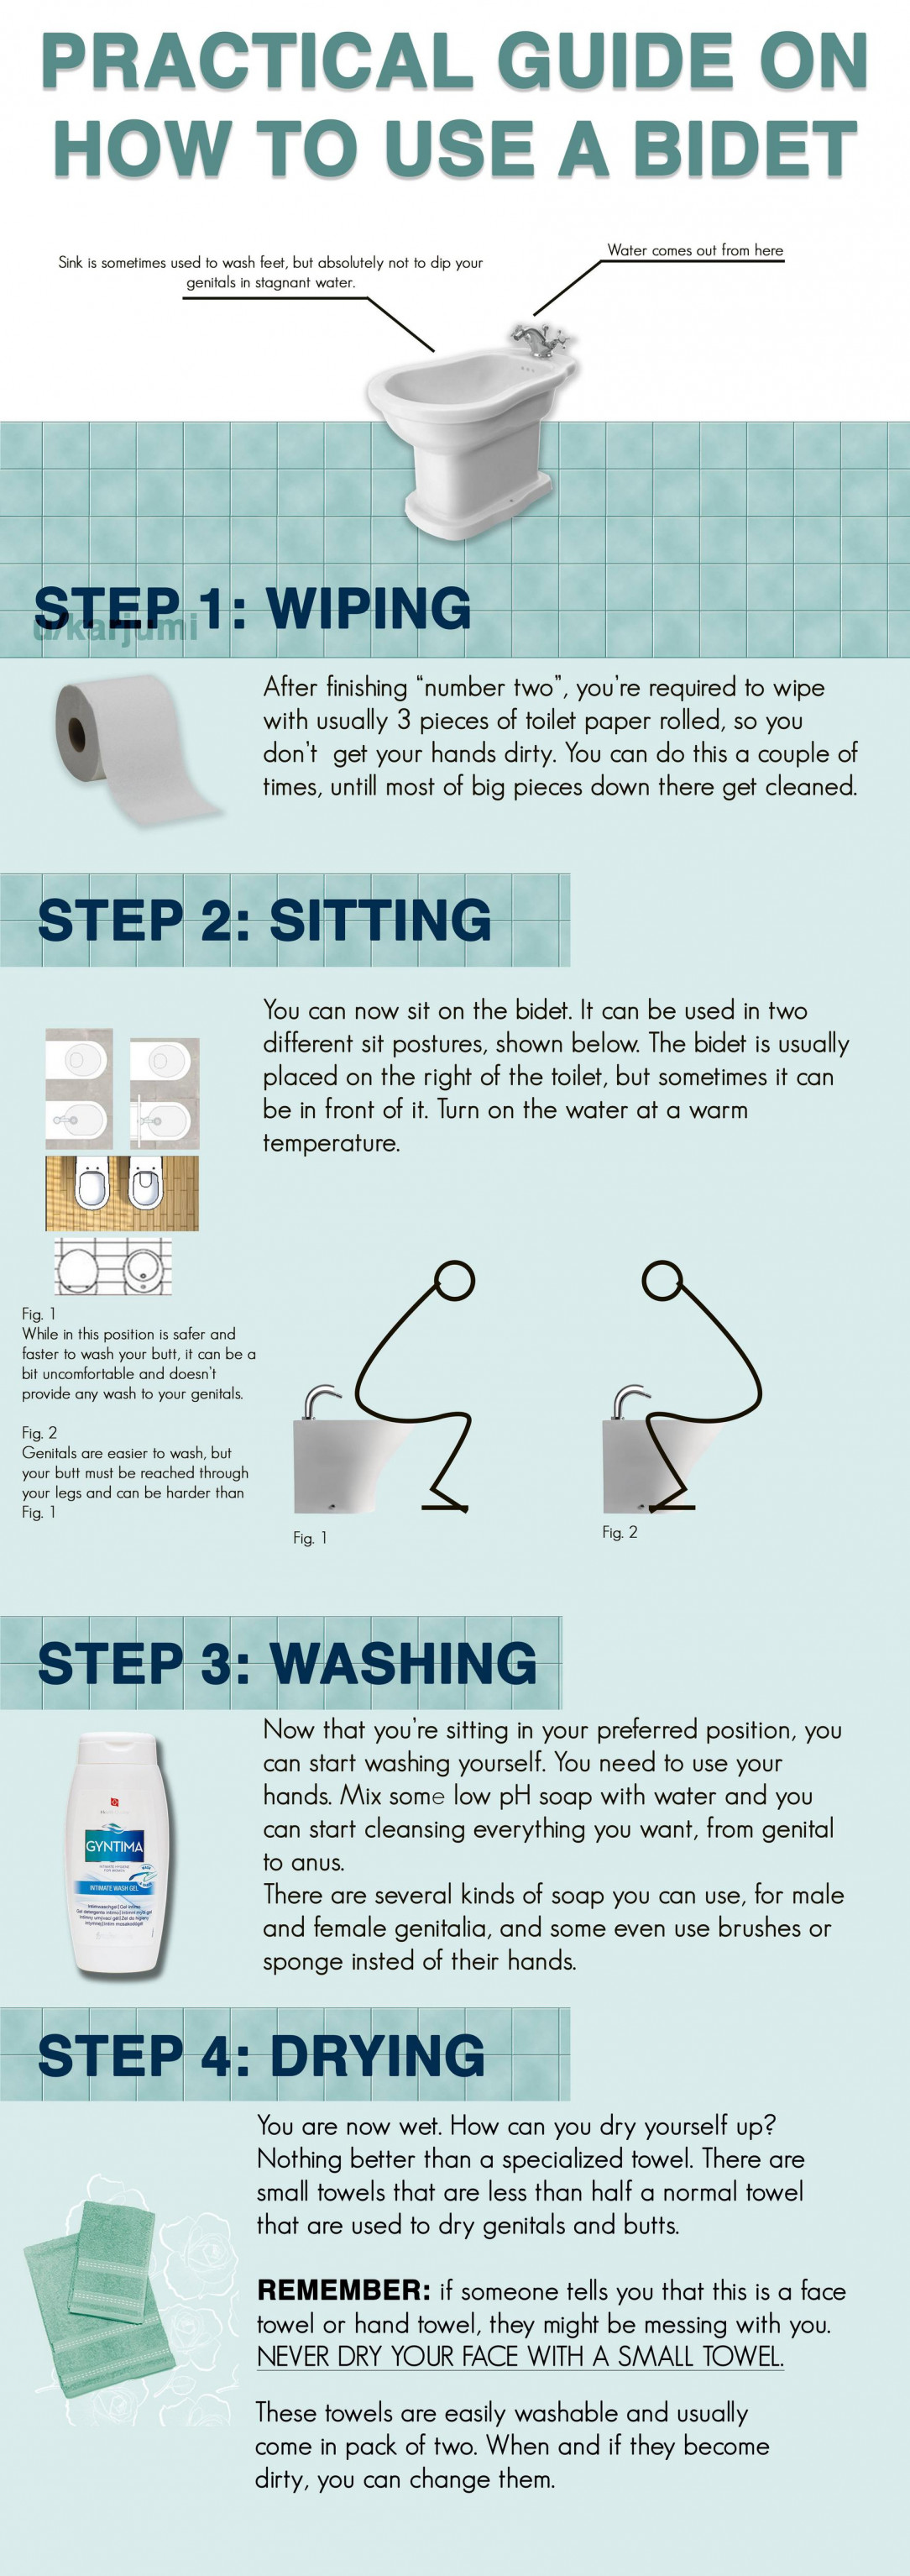 How to use a bidet